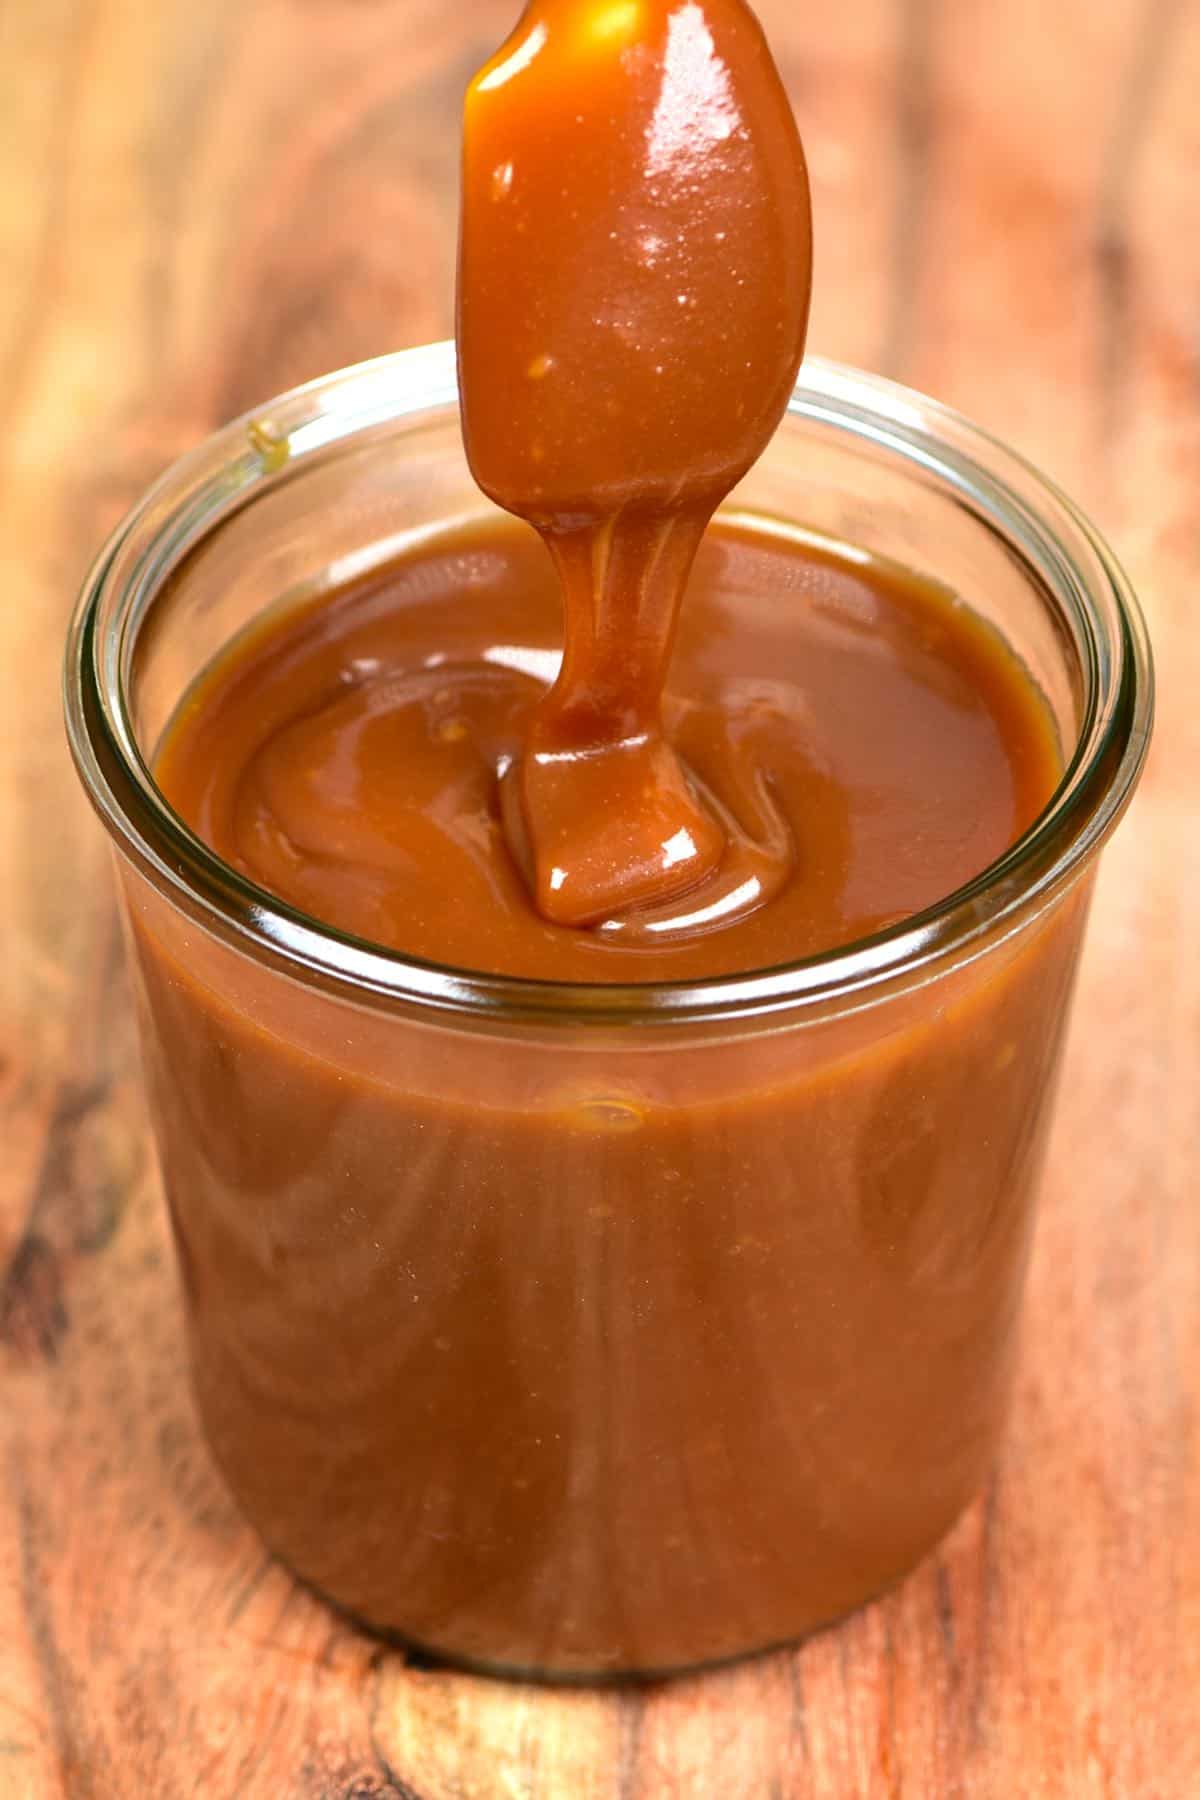 How To Make Homemade Caramel Sauce (+ Tips and Flavor Options)